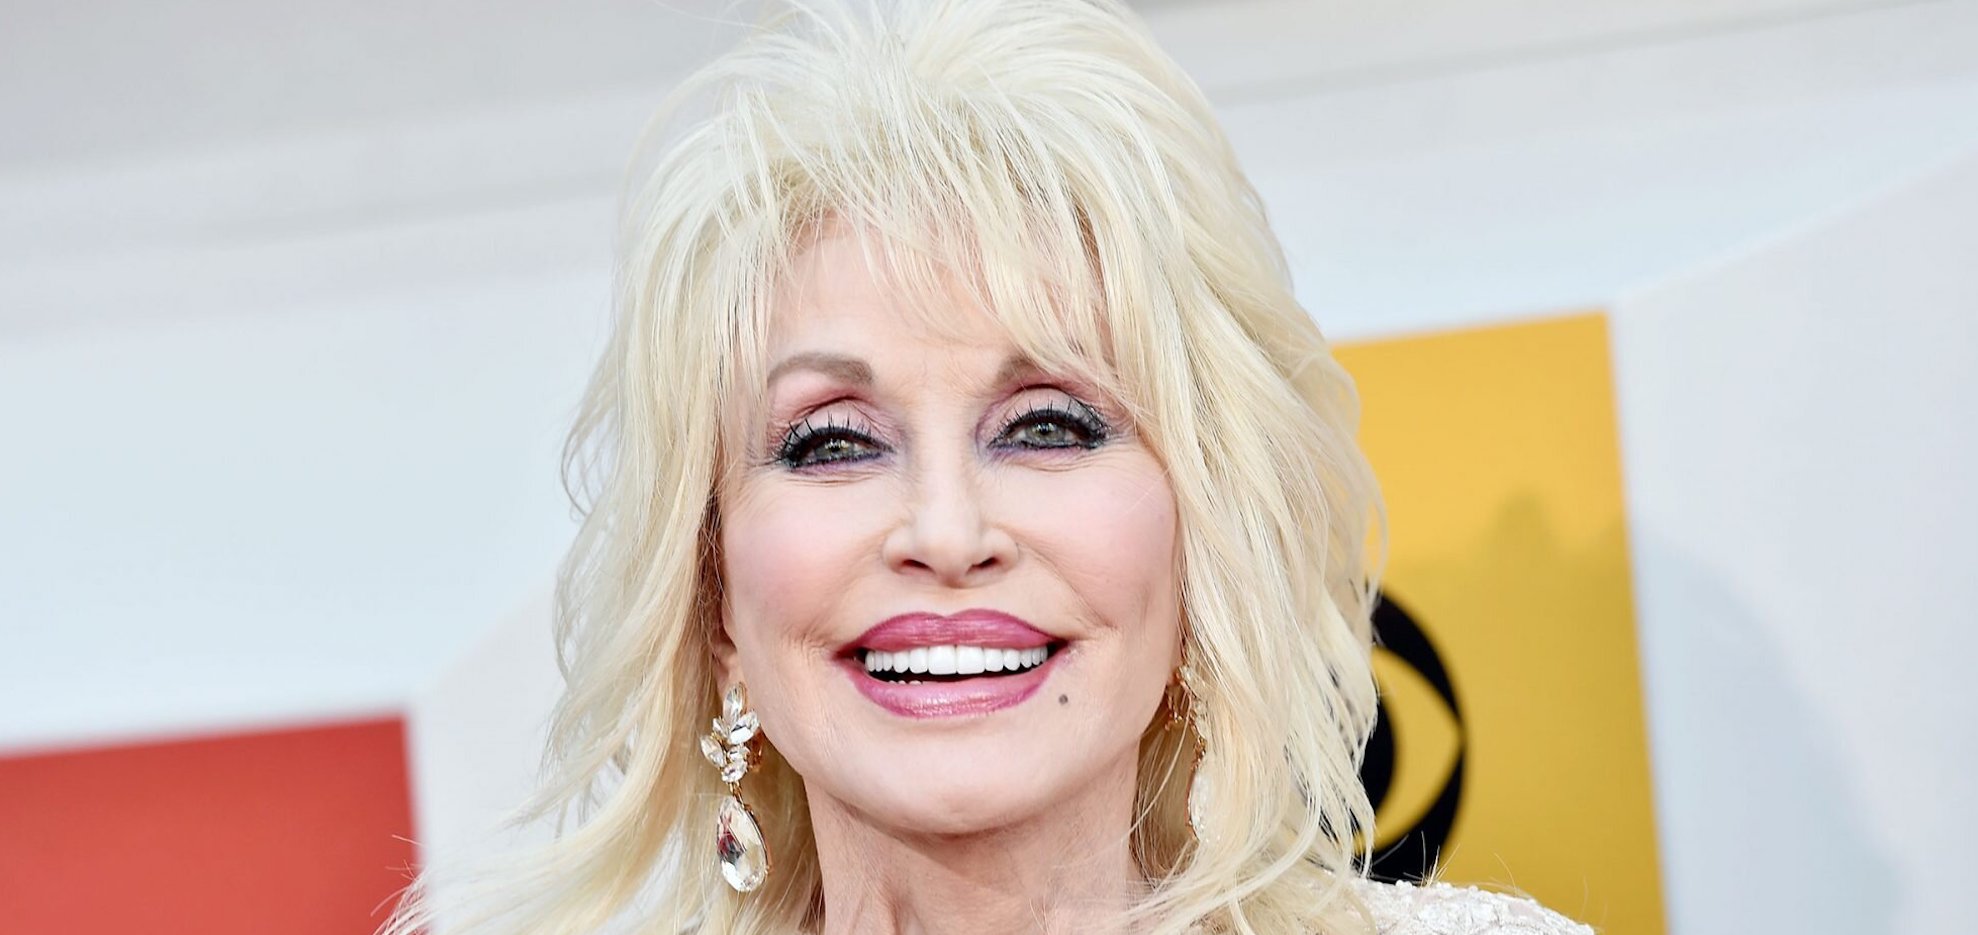 Dolly Parton Invested Whitney Houston “I Will Always Love You” Royalties in Black Community